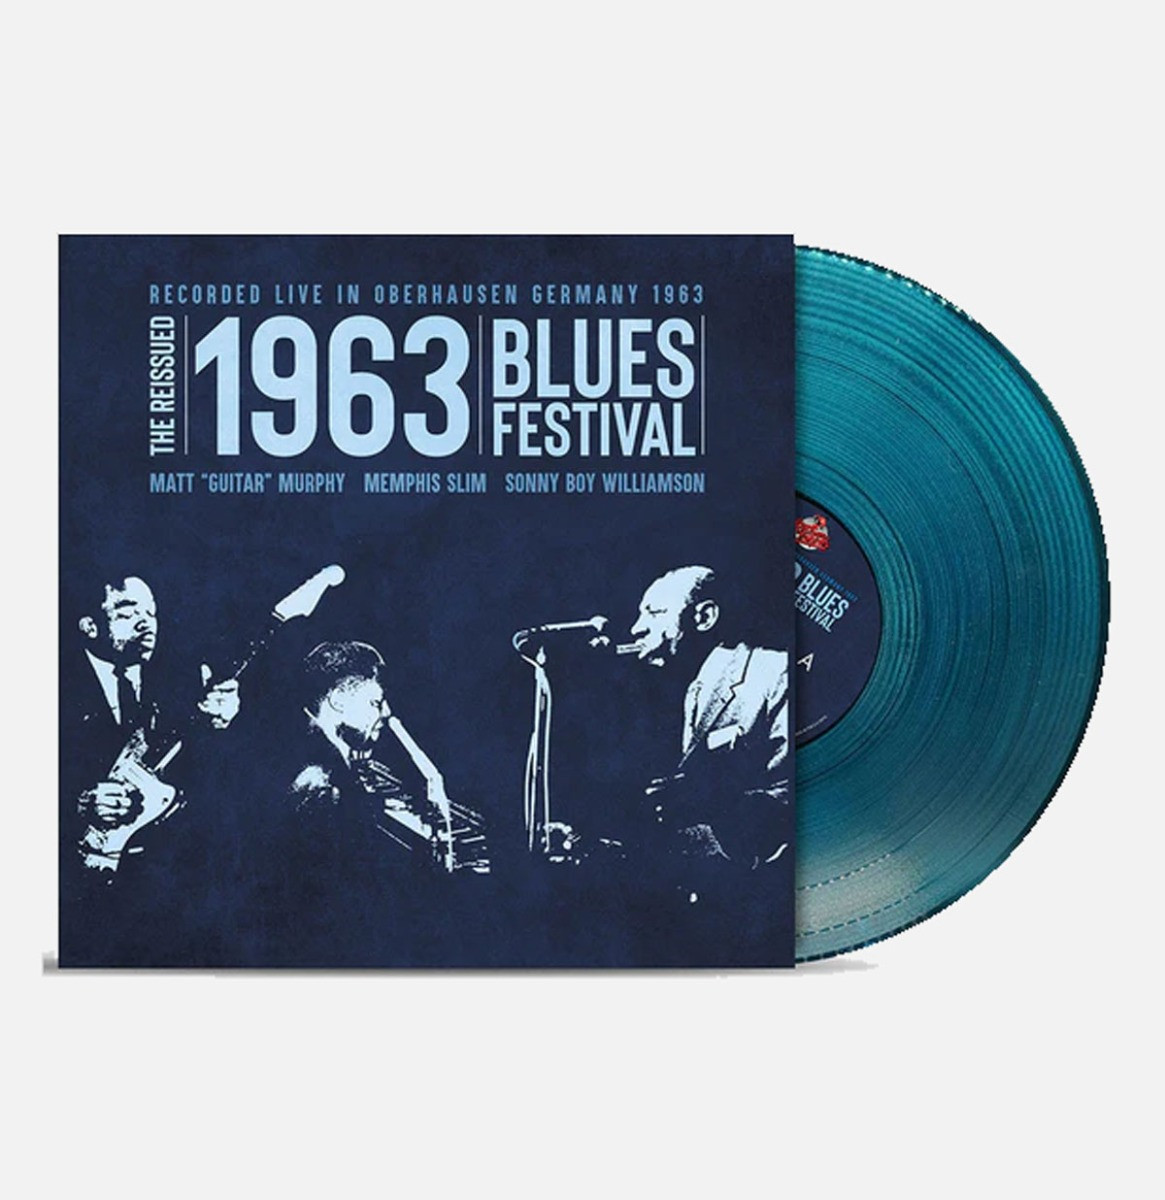 Various Artists - The Reissued 1963 Blues Festival (Opaque Blauw Vinyl) (Record Store Day 20240 LP